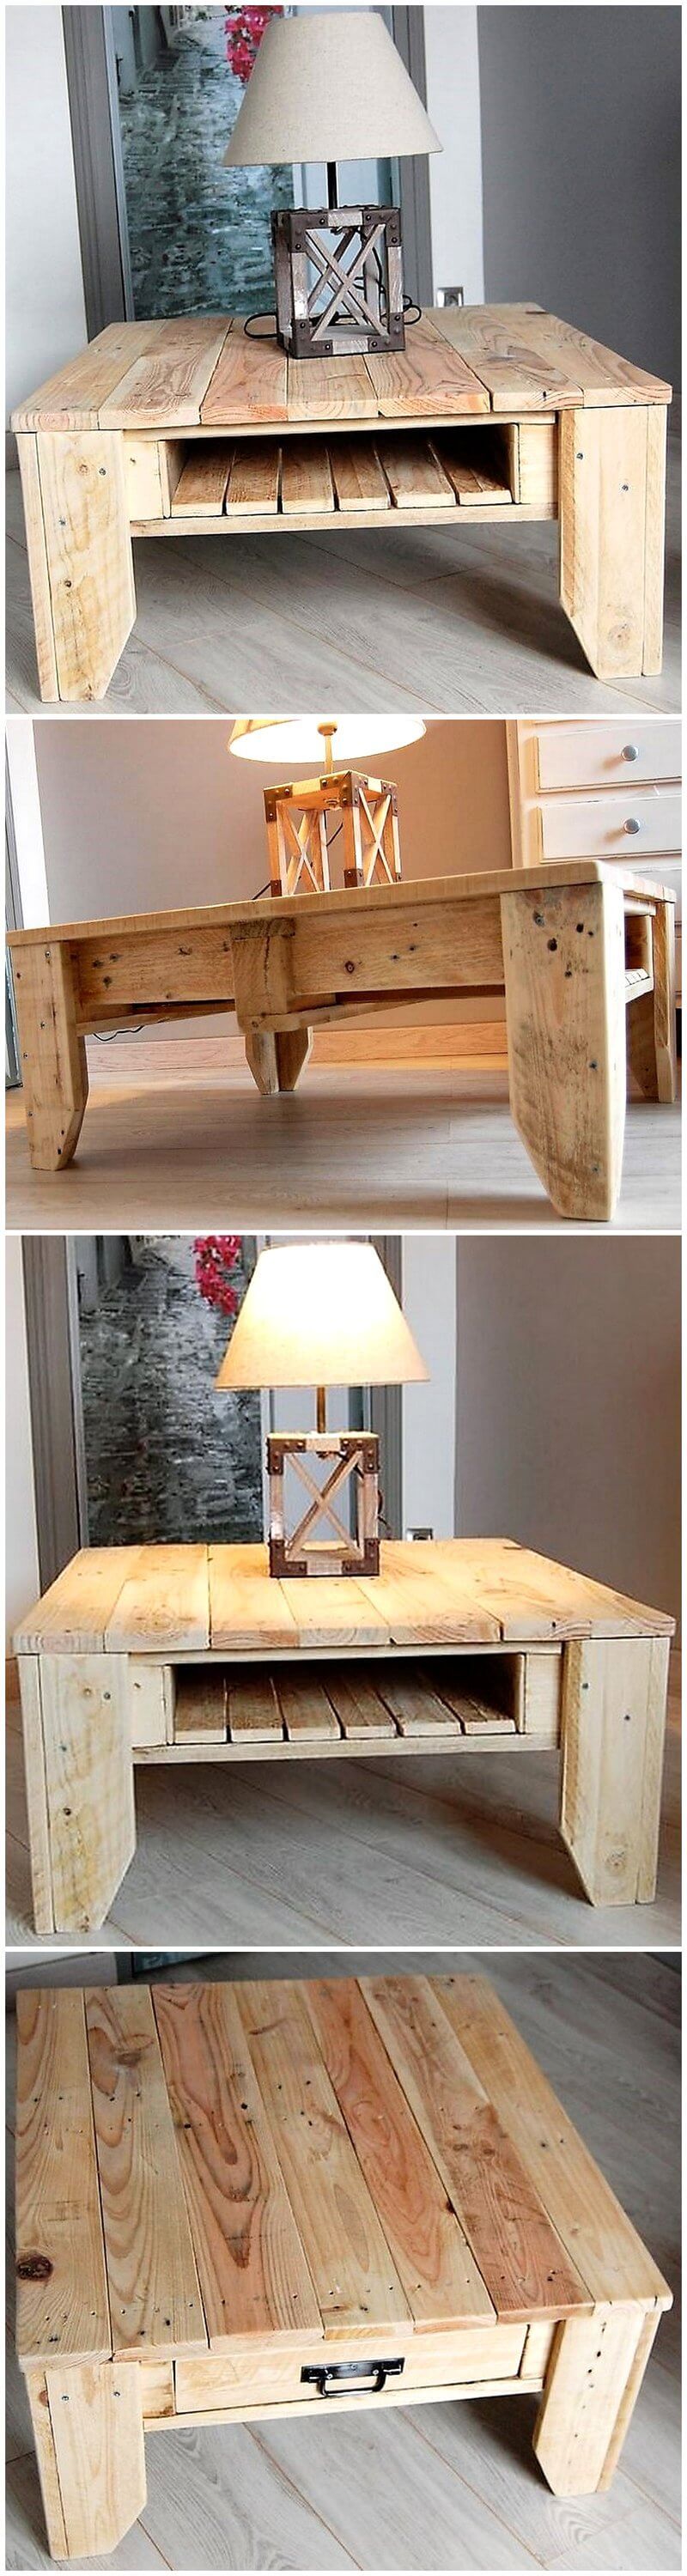 recycled pallet wooden table